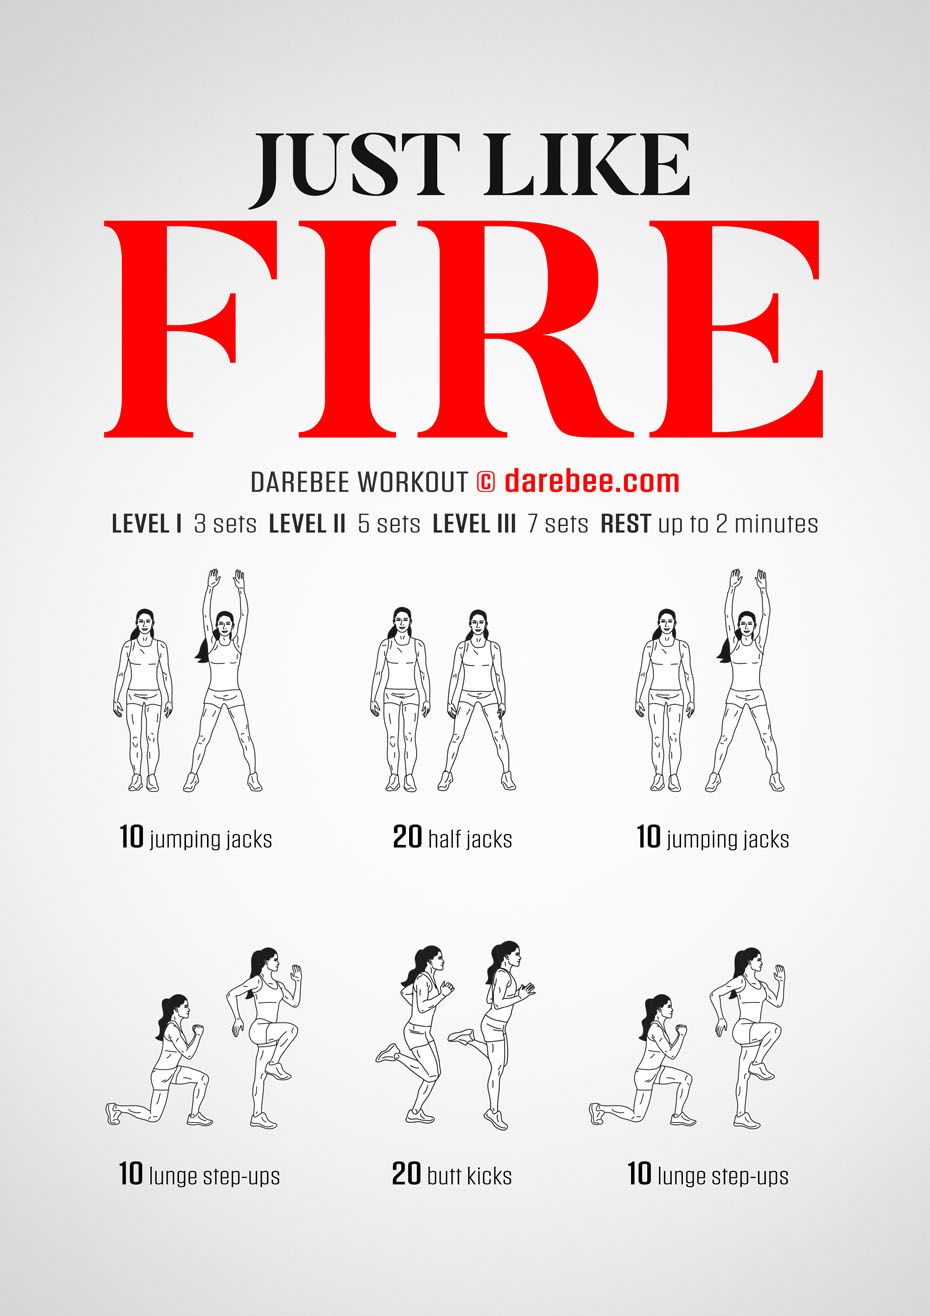 Just Like Fire is a DAREBEE home fitness, lower body, cardio workout that will help you increase your endurance.